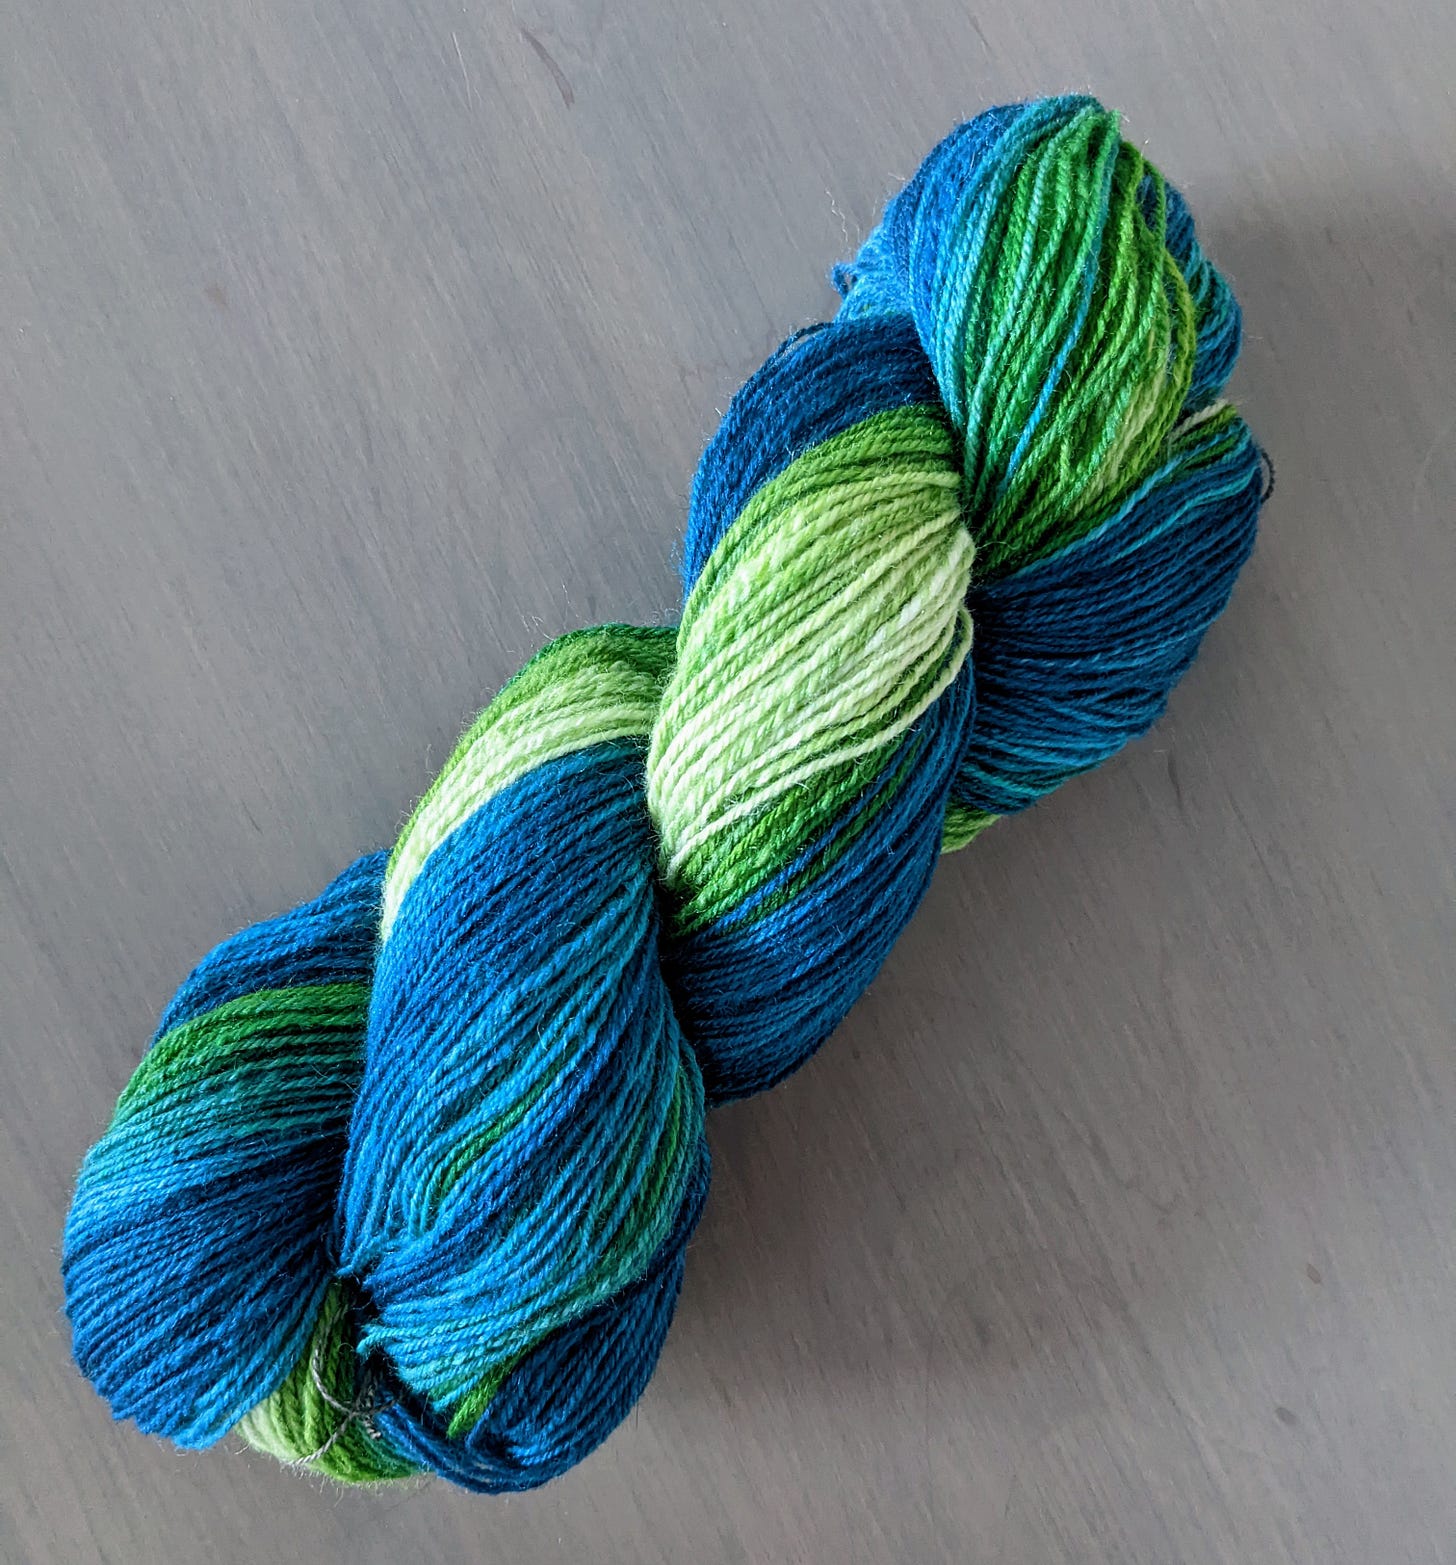 A skein of variegated yarn ranging from pale green to dark blue on a gray background